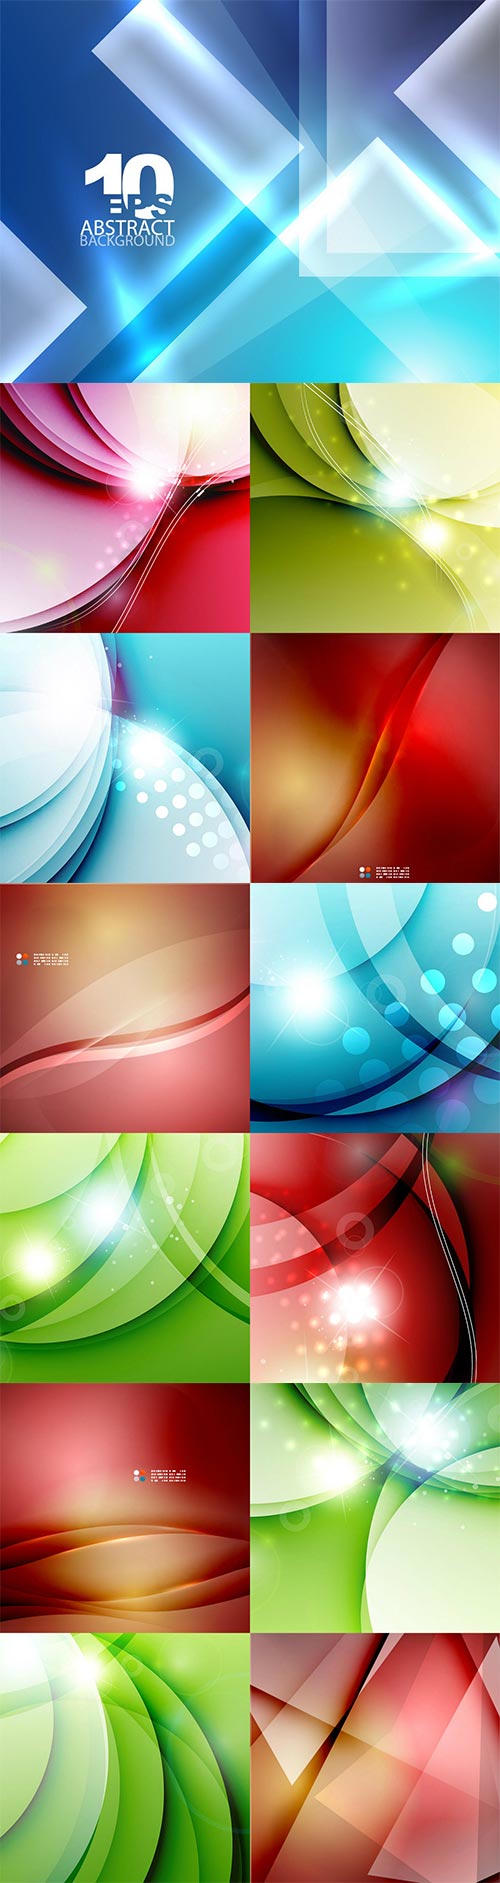 Bright colorful abstract backgrounds vector - 83